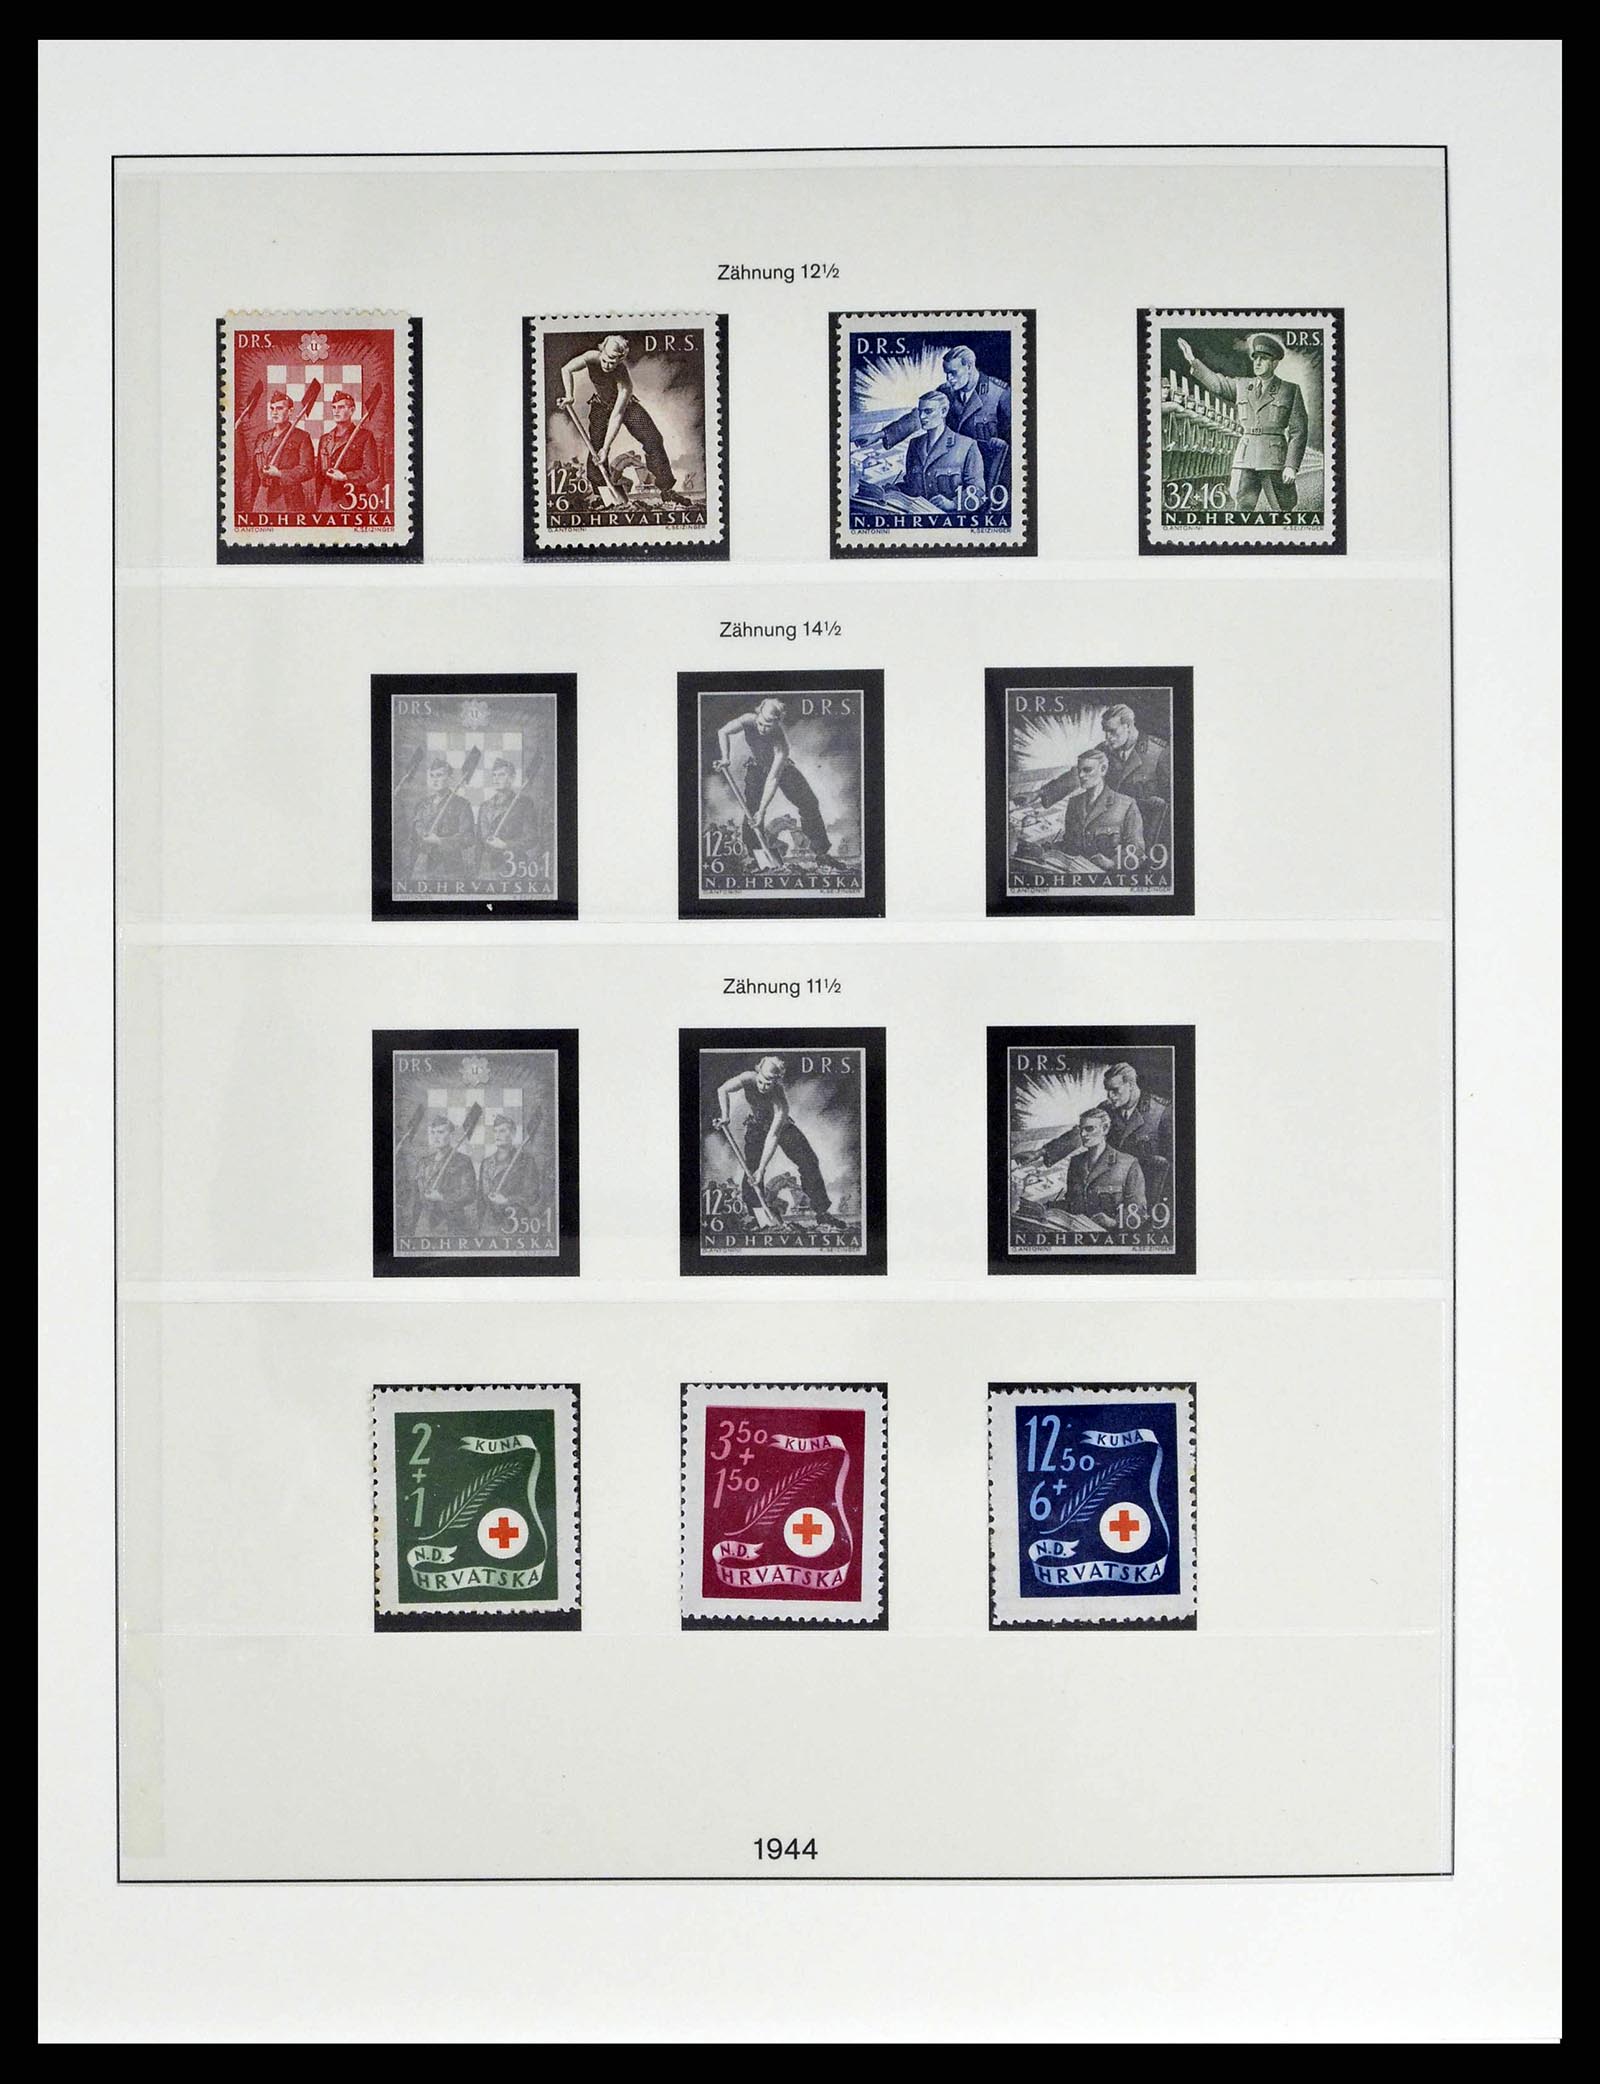 38505 0041 - Stamp collection 38505 German occupations 2nd world war 1939-1945.